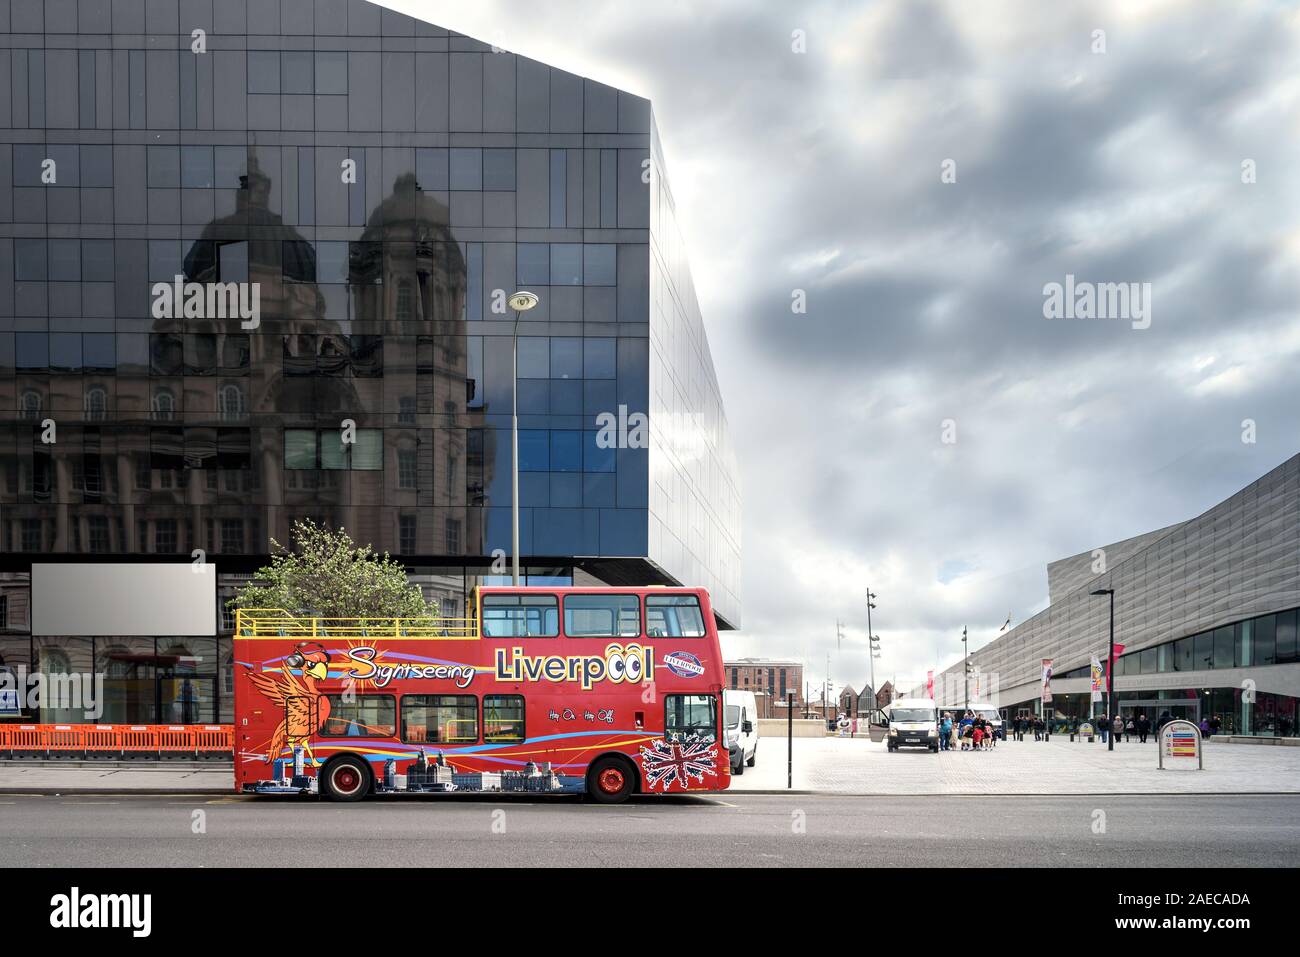 LIVERPOOL, UK-19 MAY, 2015:Hop On hop off bus for city exploring in Liverpool uk Stock Photo